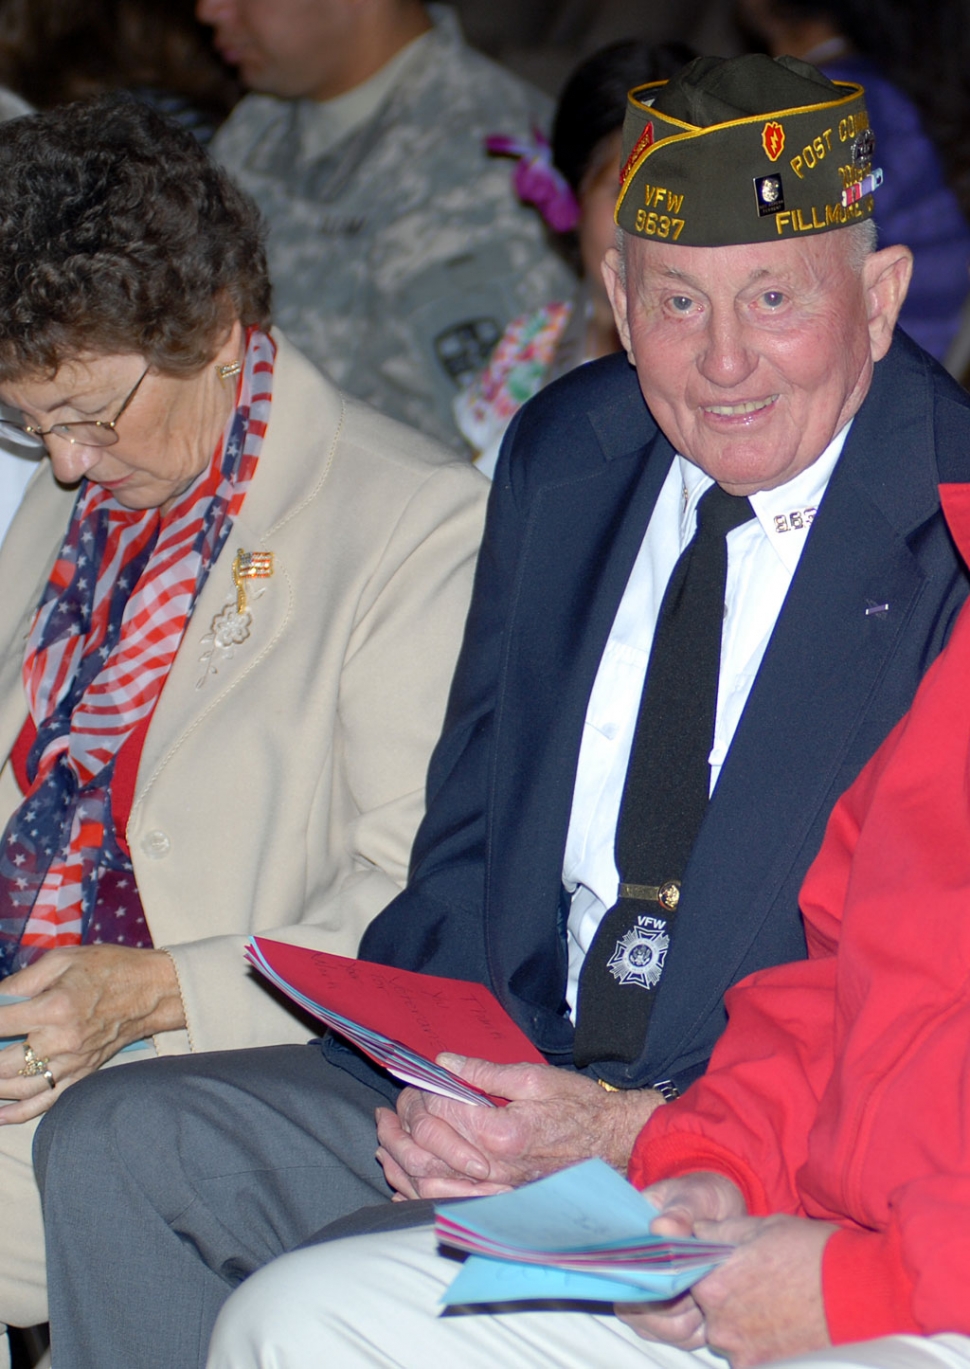 Veteran Jim Rogers, VFW Post 9637, and Mary Ford, founder of Pride in America, enjoyed the annual program, honoring our nation’s veterans.